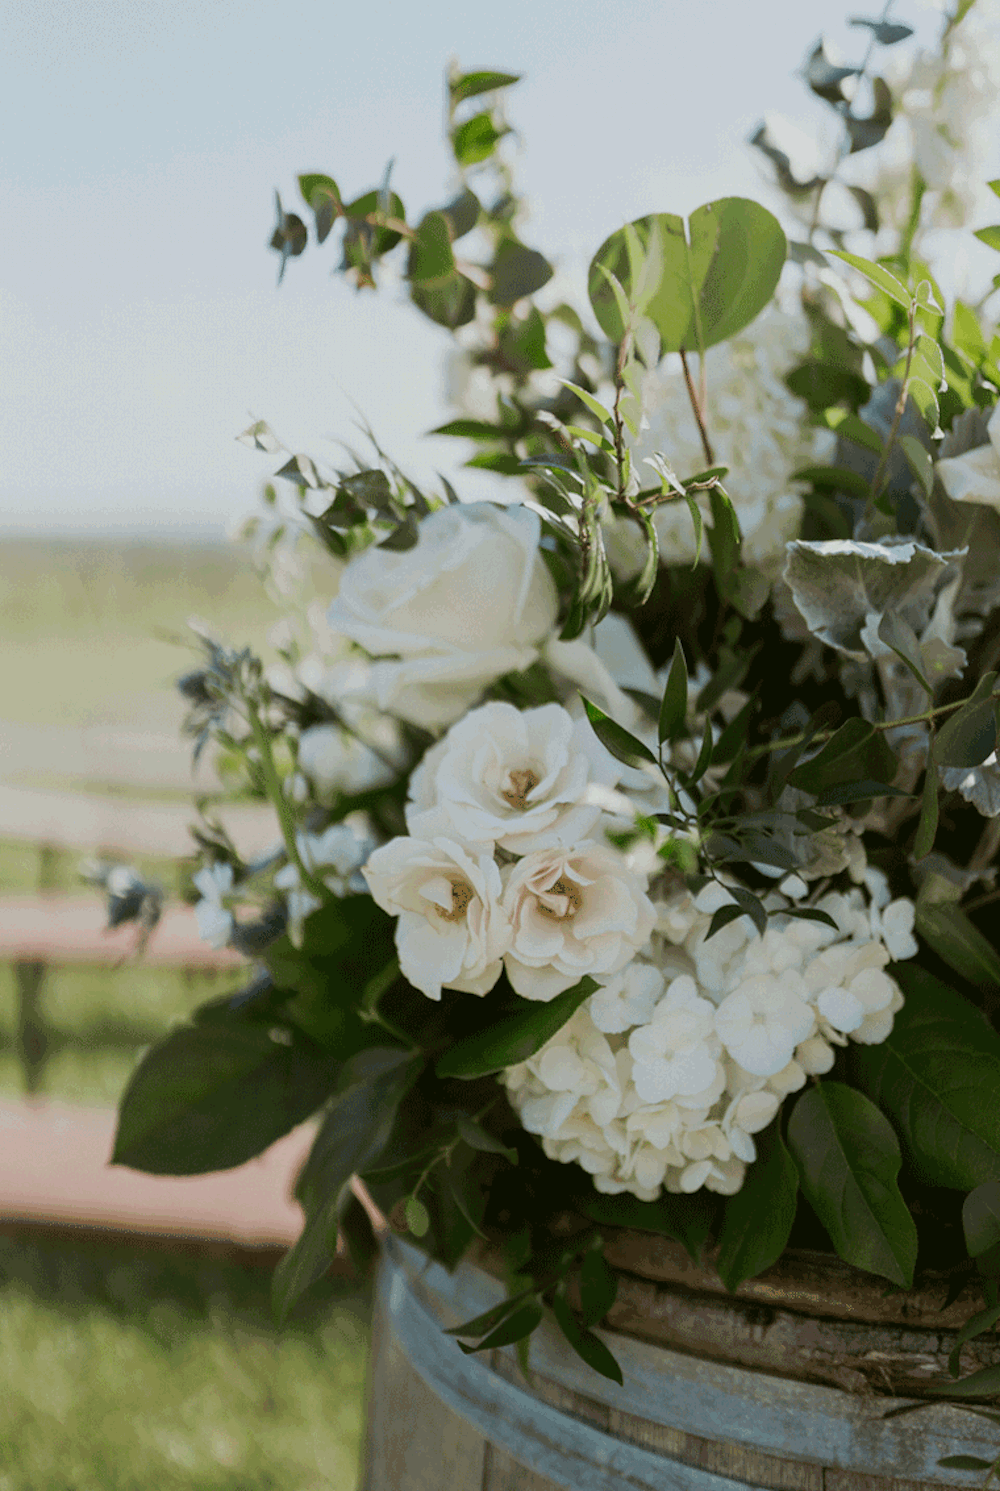 Luscious white florals blowing in the breeze at the ceremony location.